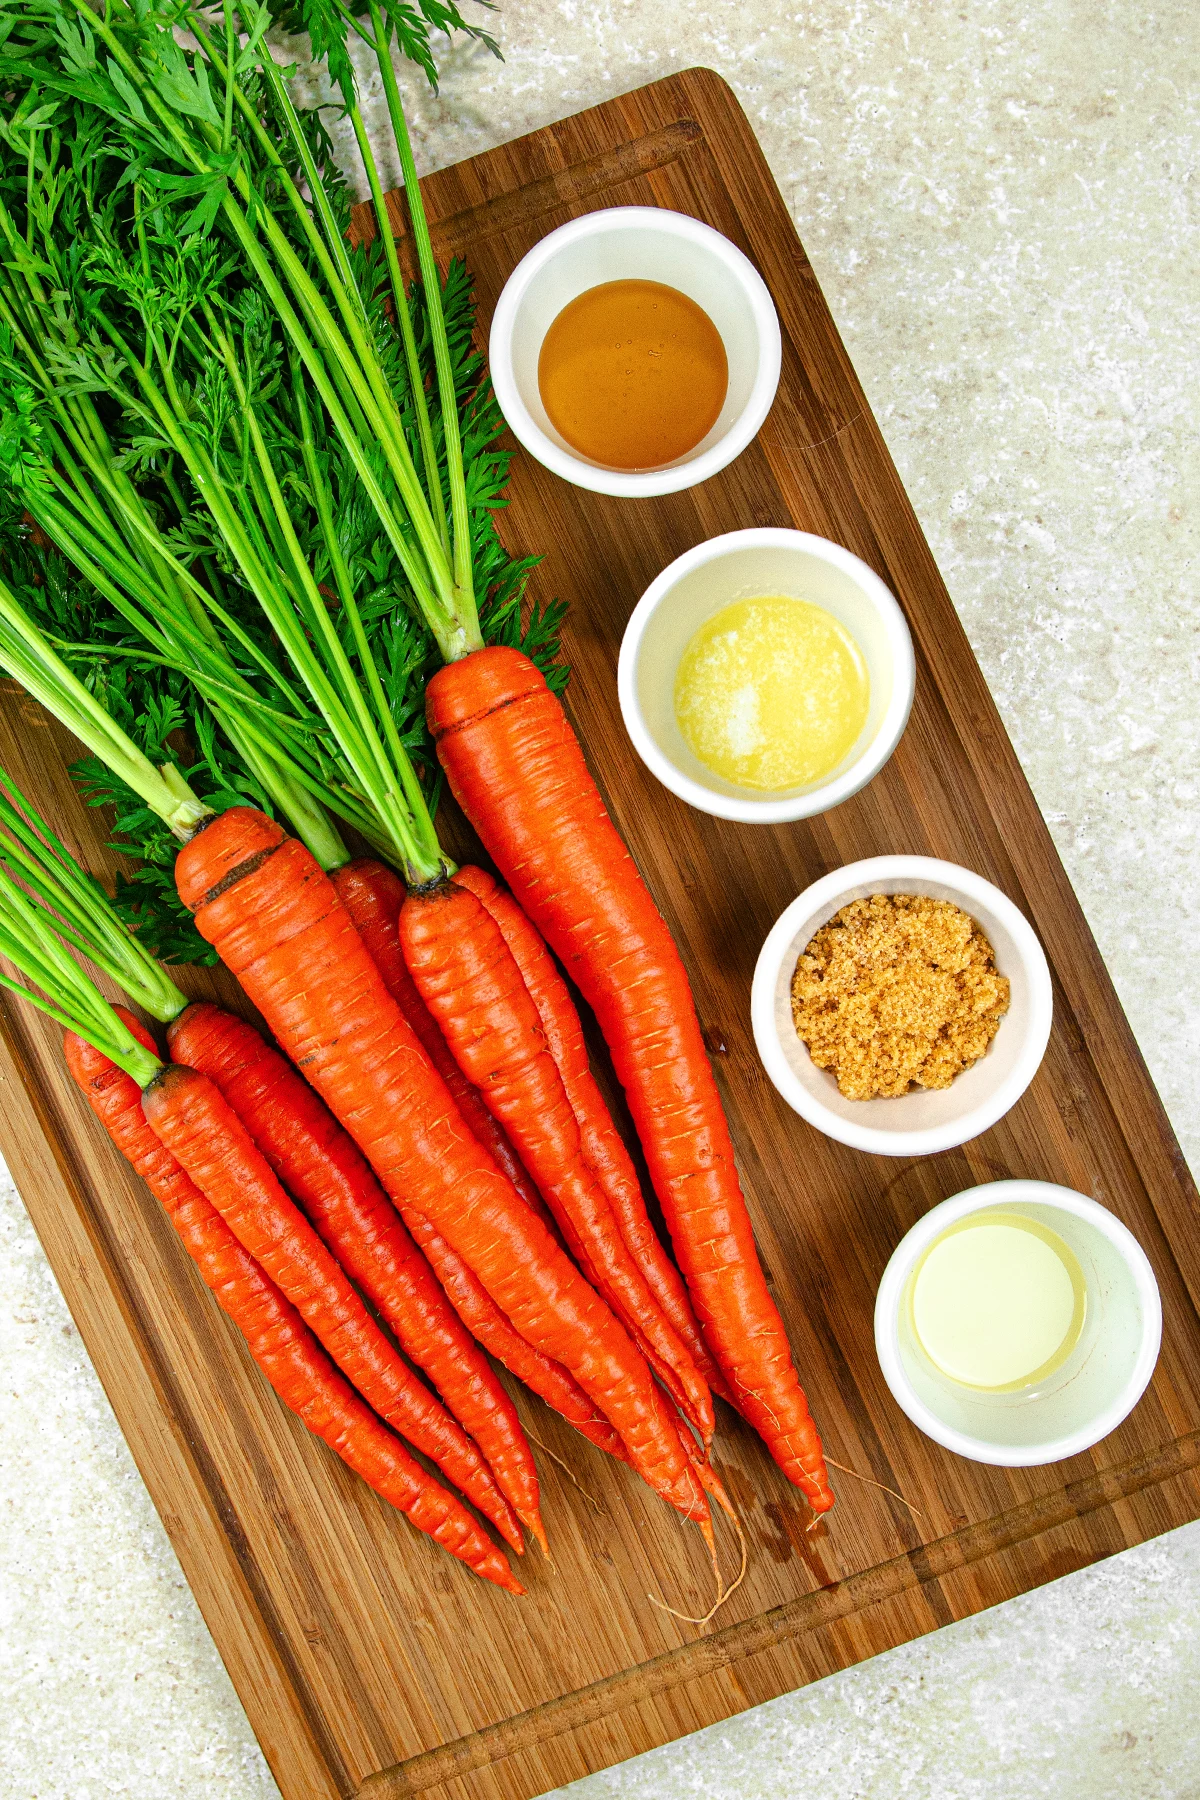 air fryer carrots ingredients. Carrots and ramekins with ingredients inside lined up on a cutting board.